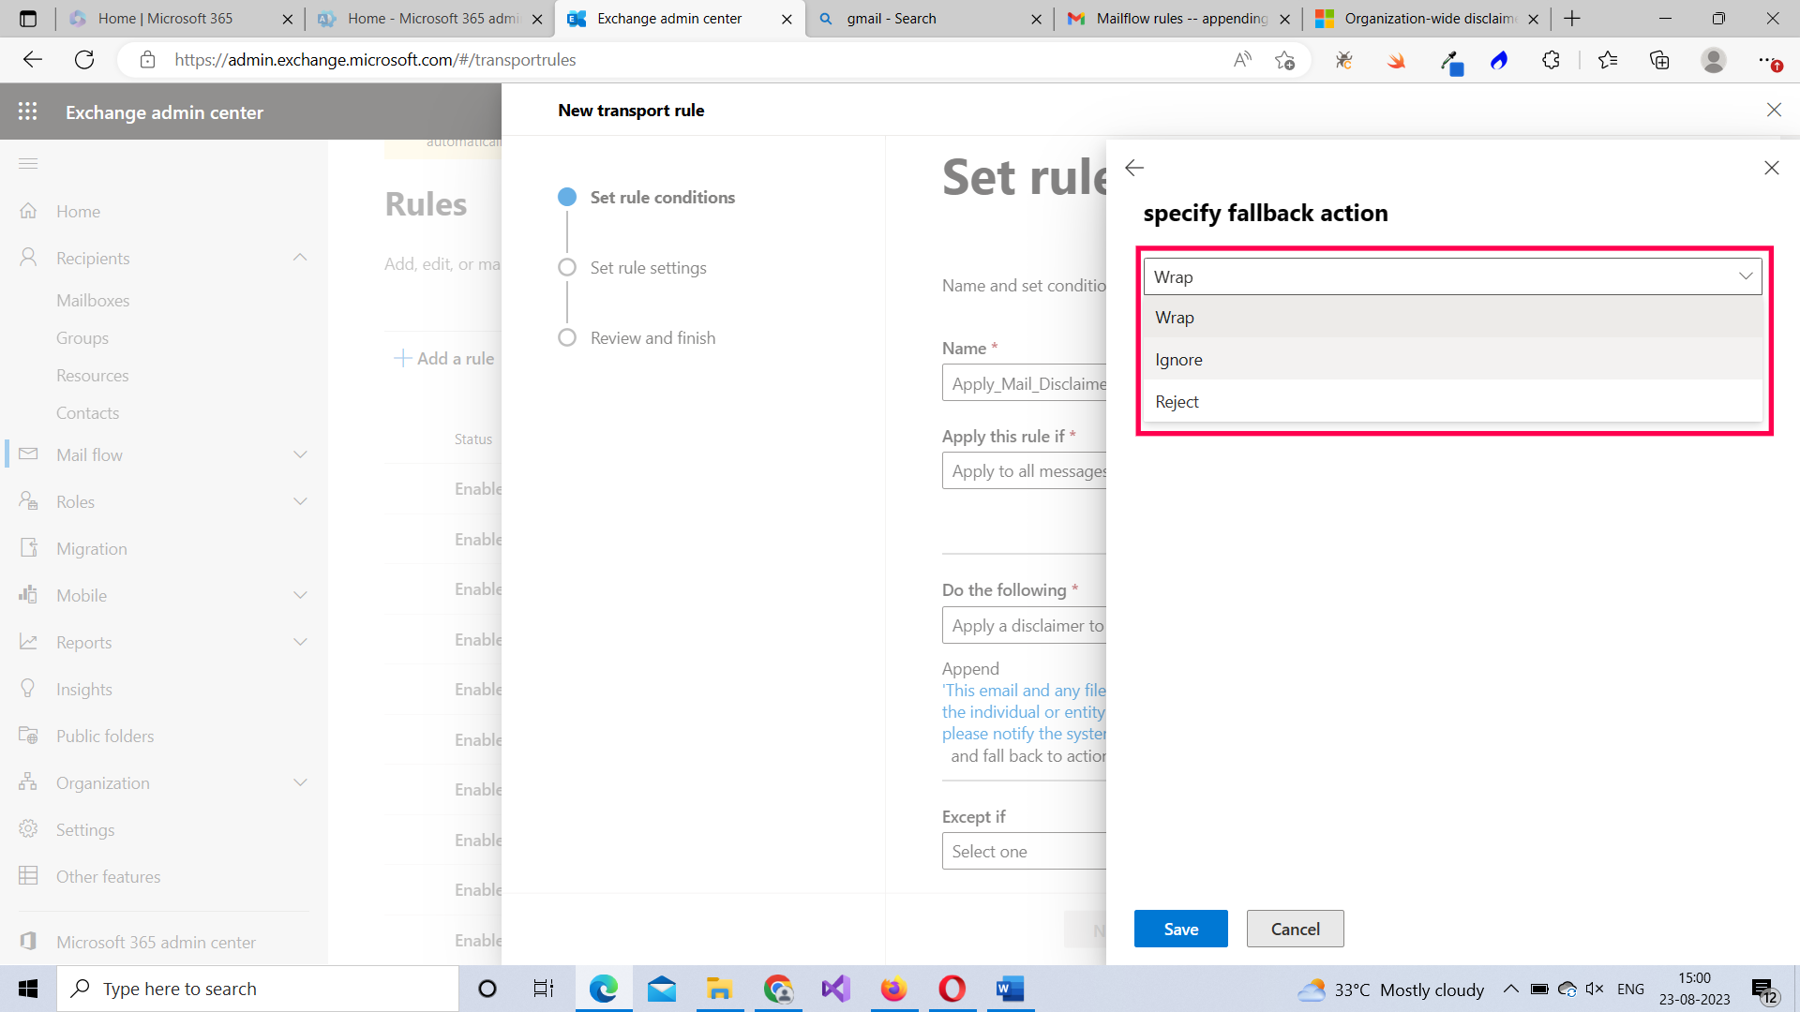 This screenshot shows how you can configure fallback options for the mail flow rule you are setting up.